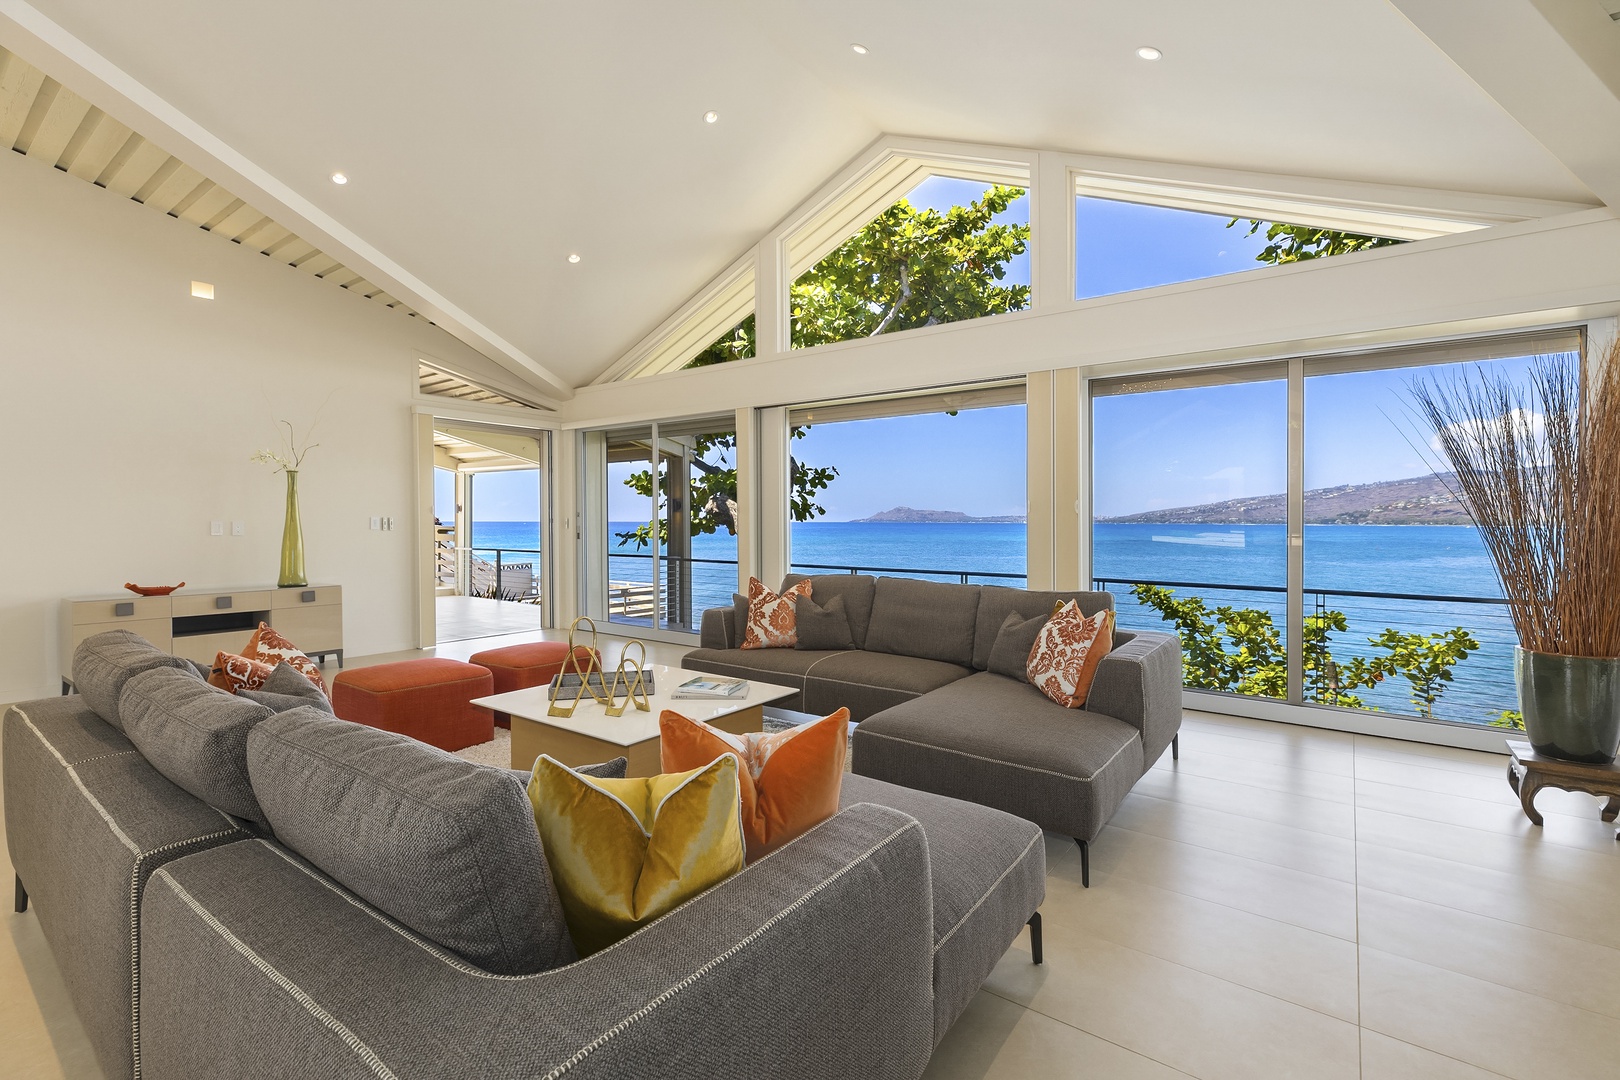 Honolulu Vacation Rentals, Hanapepe House - Family Room with Ocean Views